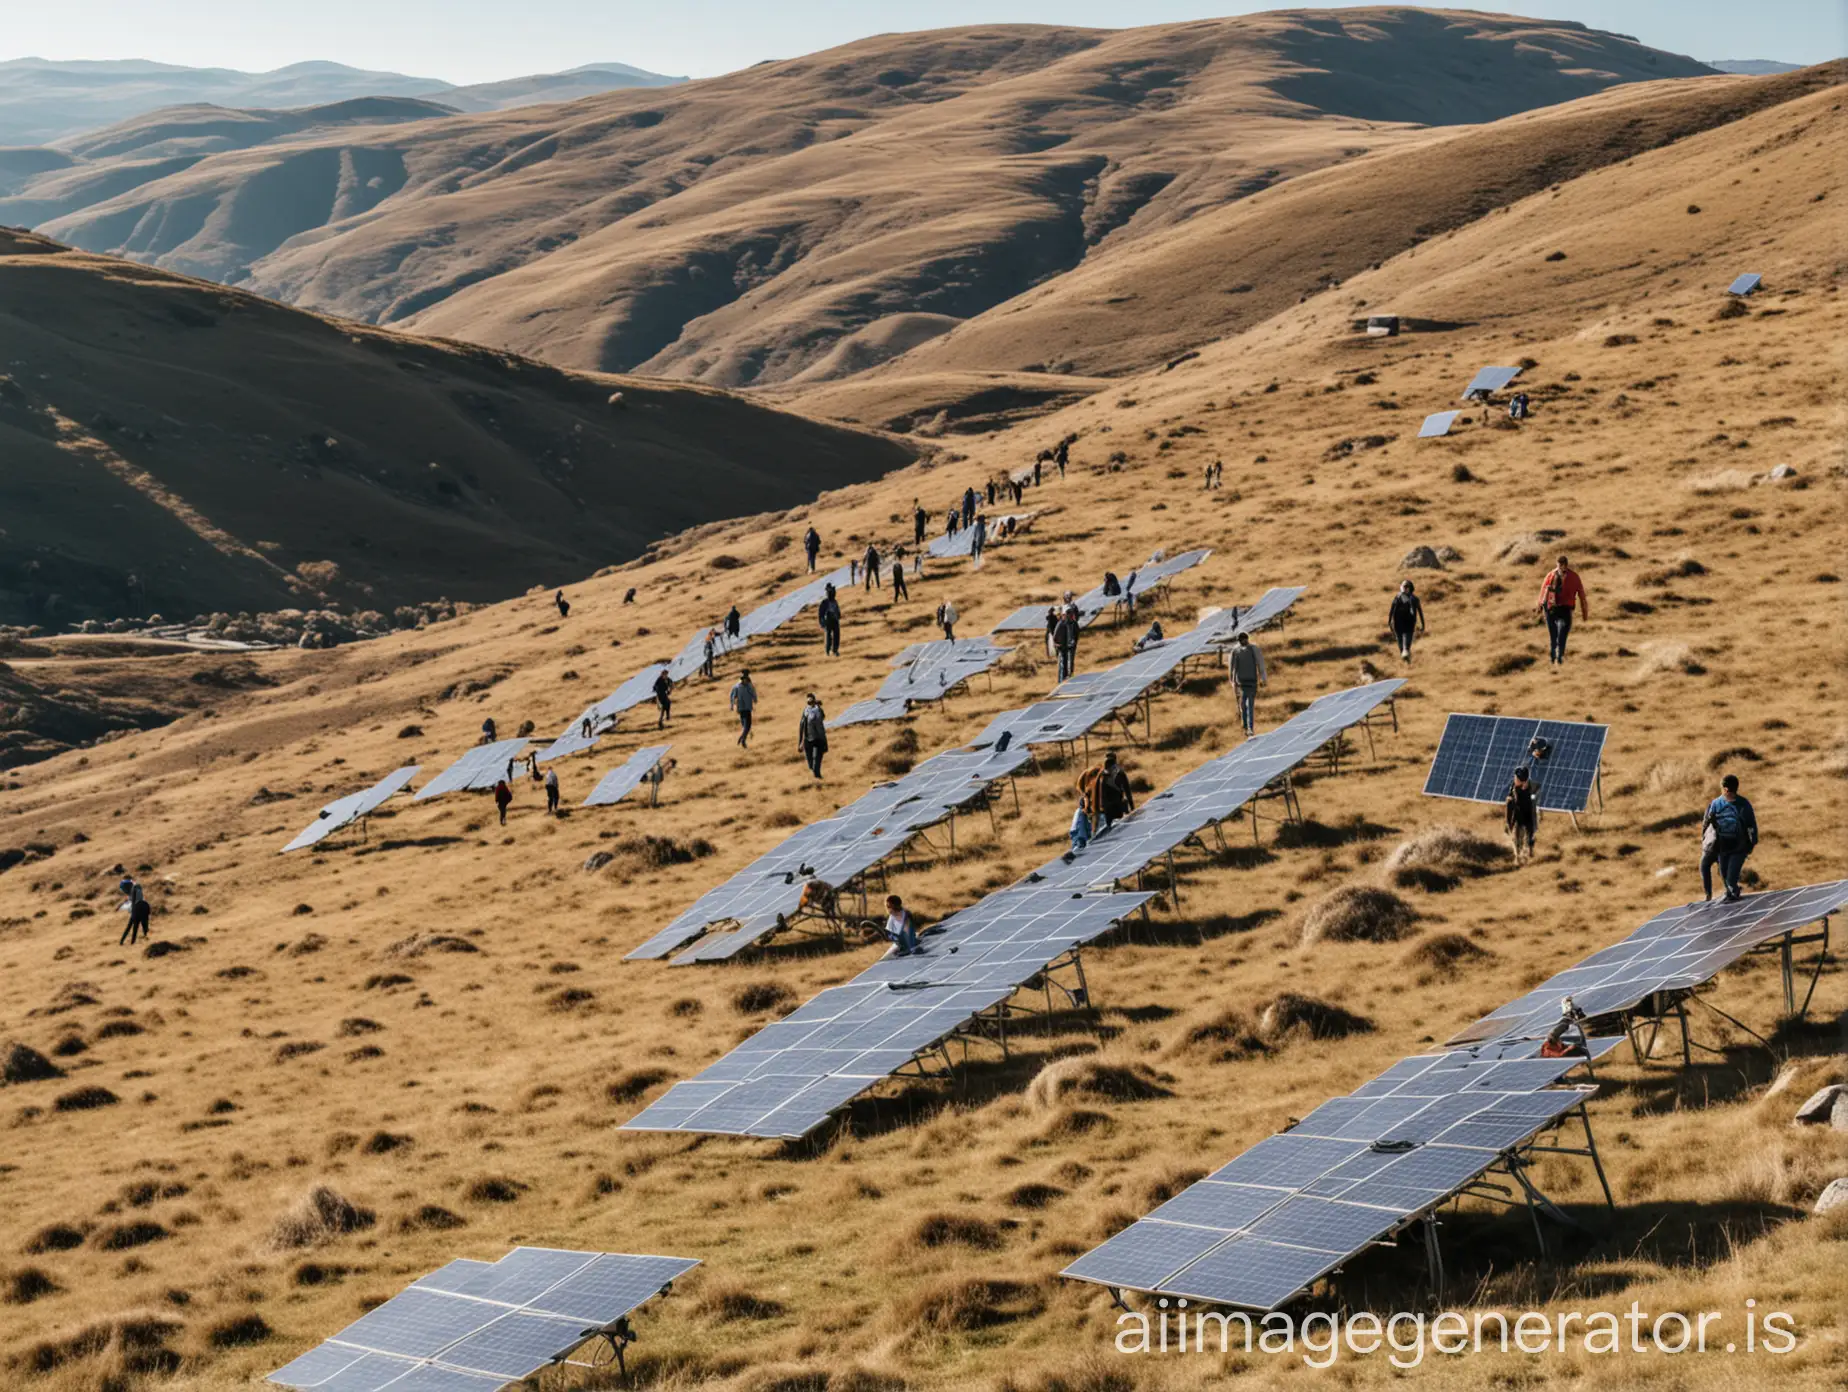 Scenic-Landscape-with-People-Walking-Amidst-Solar-Panels